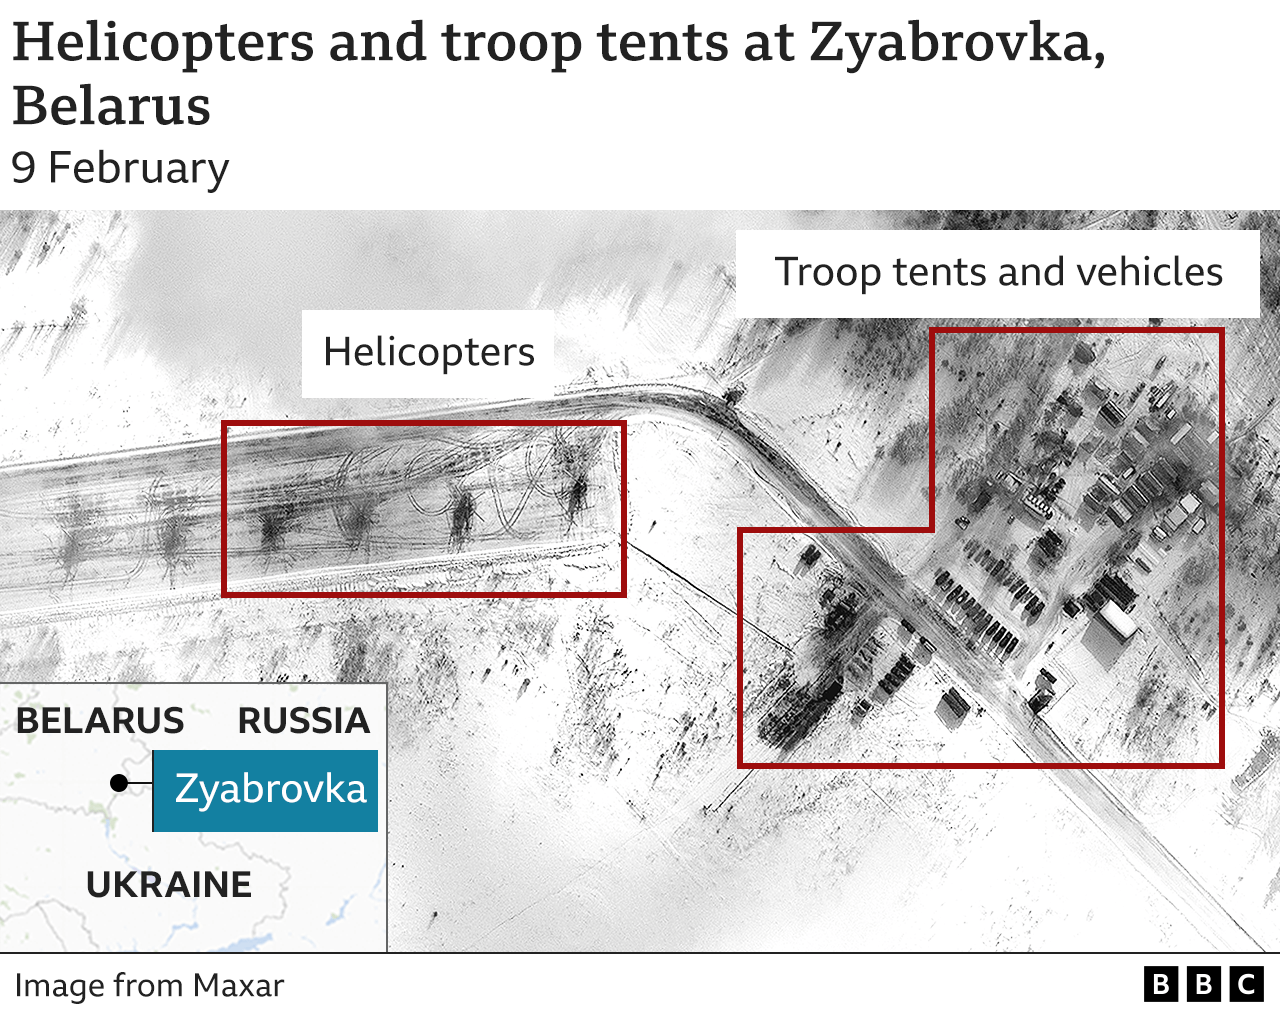 Satellite image showing helicopters and troop tents at Zyabrovka